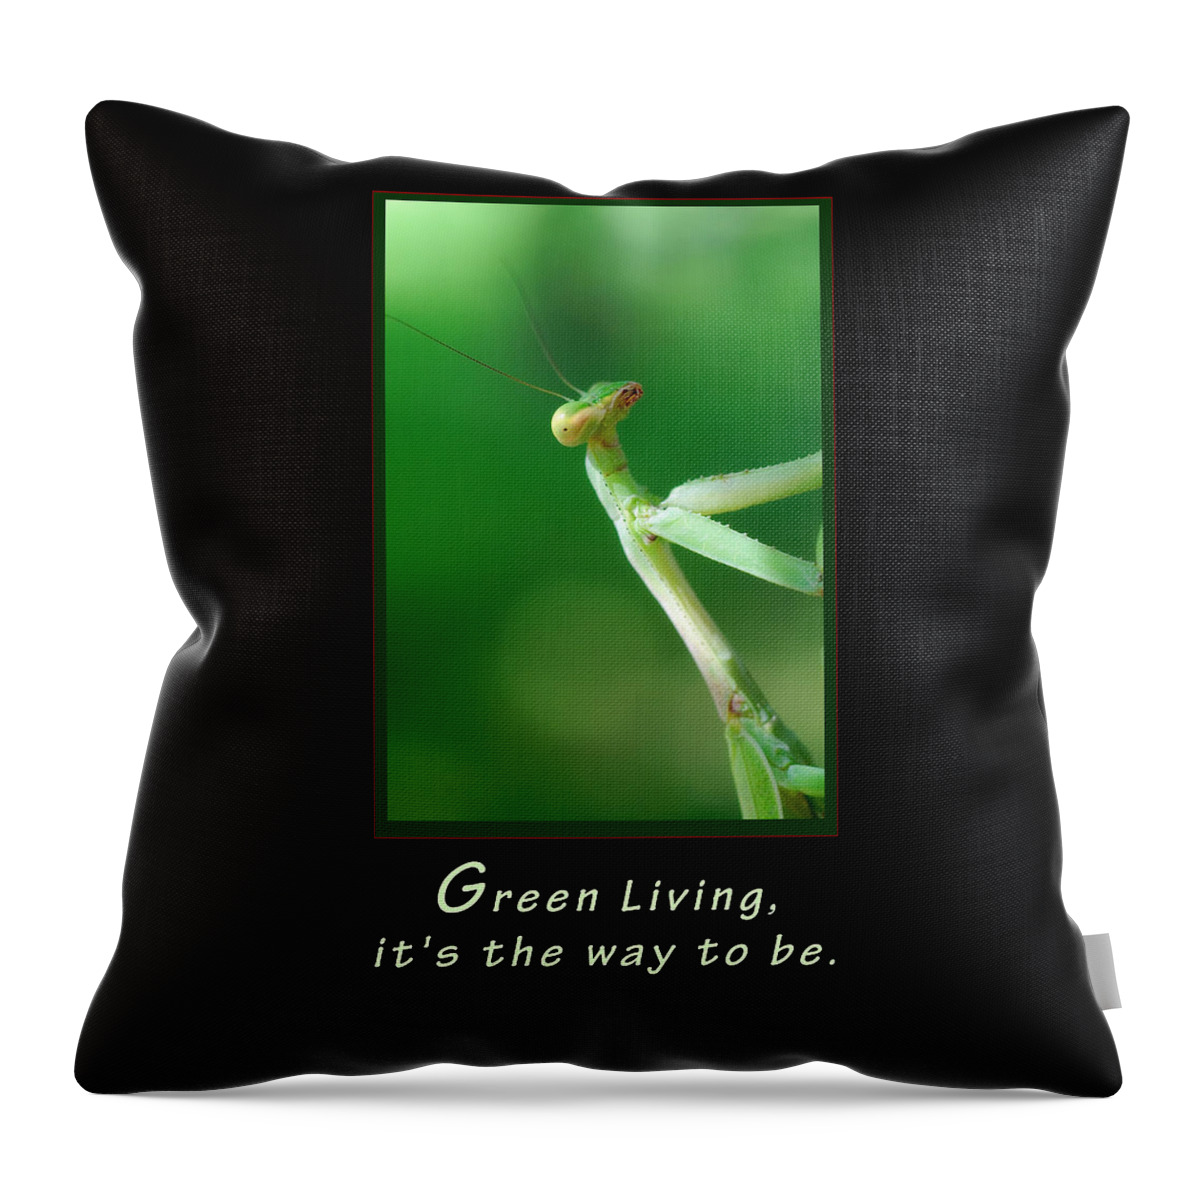 Texas Throw Pillow featuring the photograph Green Living by Erich Grant